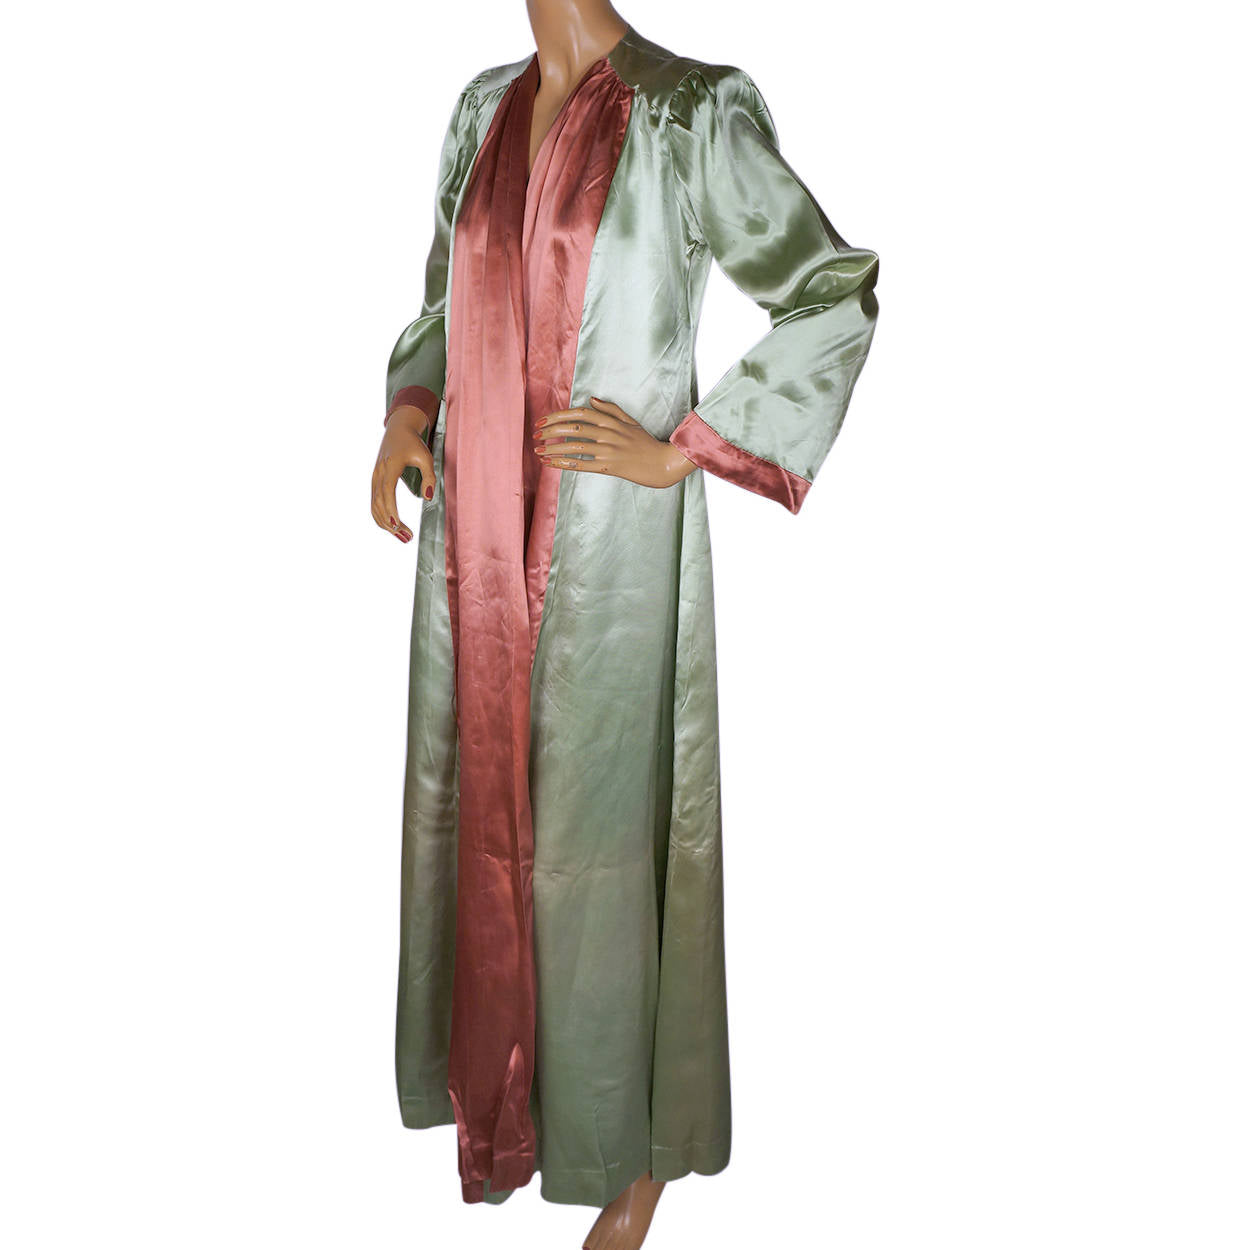 Vintage 1930s Satin Dressing Gown Green Pink Lounging Robe Ladies Size M